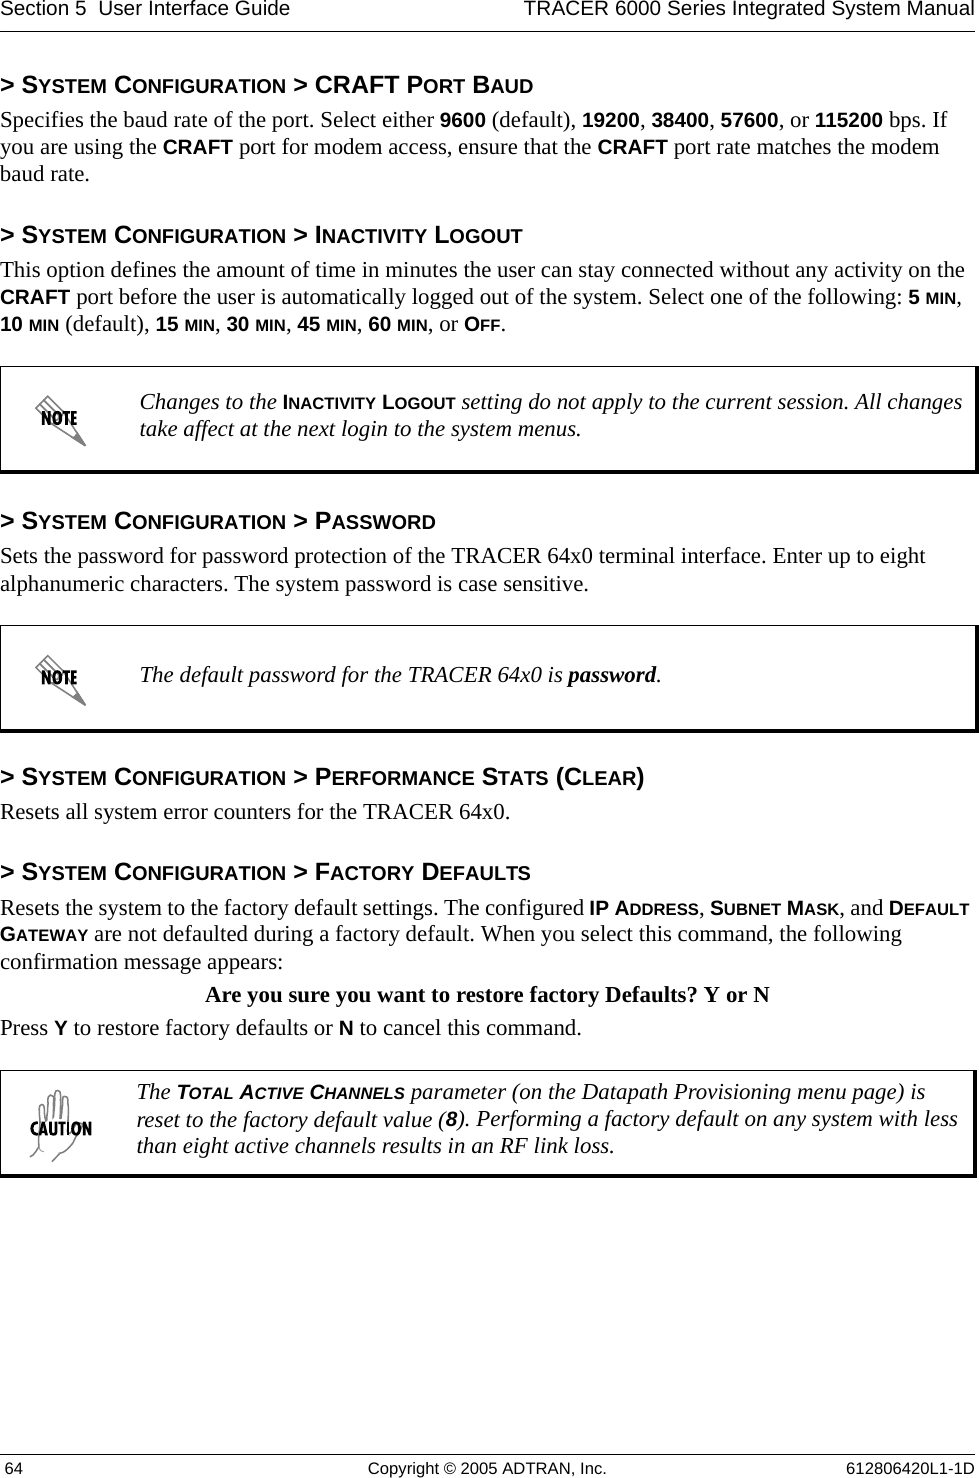 Section 5  User Interface Guide TRACER 6000 Series Integrated System Manual 64 Copyright © 2005 ADTRAN, Inc. 612806420L1-1D&gt; SYSTEM CONFIGURATION &gt; CRAFT PORT BAUDSpecifies the baud rate of the port. Select either 9600 (default), 19200, 38400, 57600, or 115200 bps. If you are using the CRAFT port for modem access, ensure that the CRAFT port rate matches the modem baud rate.&gt; SYSTEM CONFIGURATION &gt; INACTIVITY LOGOUTThis option defines the amount of time in minutes the user can stay connected without any activity on the CRAFT port before the user is automatically logged out of the system. Select one of the following: 5 MIN, 10 MIN (default), 15 MIN, 30 MIN, 45 MIN, 60 MIN, or OFF.&gt; SYSTEM CONFIGURATION &gt; PASSWORDSets the password for password protection of the TRACER 64x0 terminal interface. Enter up to eight alphanumeric characters. The system password is case sensitive.&gt; SYSTEM CONFIGURATION &gt; PERFORMANCE STATS (CLEAR)Resets all system error counters for the TRACER 64x0.&gt; SYSTEM CONFIGURATION &gt; FACTORY DEFAULTSResets the system to the factory default settings. The configured IP ADDRESS, SUBNET MASK, and DEFAULT GATEWAY are not defaulted during a factory default. When you select this command, the following confirmation message appears: Are you sure you want to restore factory Defaults? Y or NPress Y to restore factory defaults or N to cancel this command.Changes to the INACTIVITY LOGOUT setting do not apply to the current session. All changes take affect at the next login to the system menus.The default password for the TRACER 64x0 is password.The TOTAL ACTIVE CHANNELS parameter (on the Datapath Provisioning menu page) is reset to the factory default value (8). Performing a factory default on any system with less than eight active channels results in an RF link loss. 